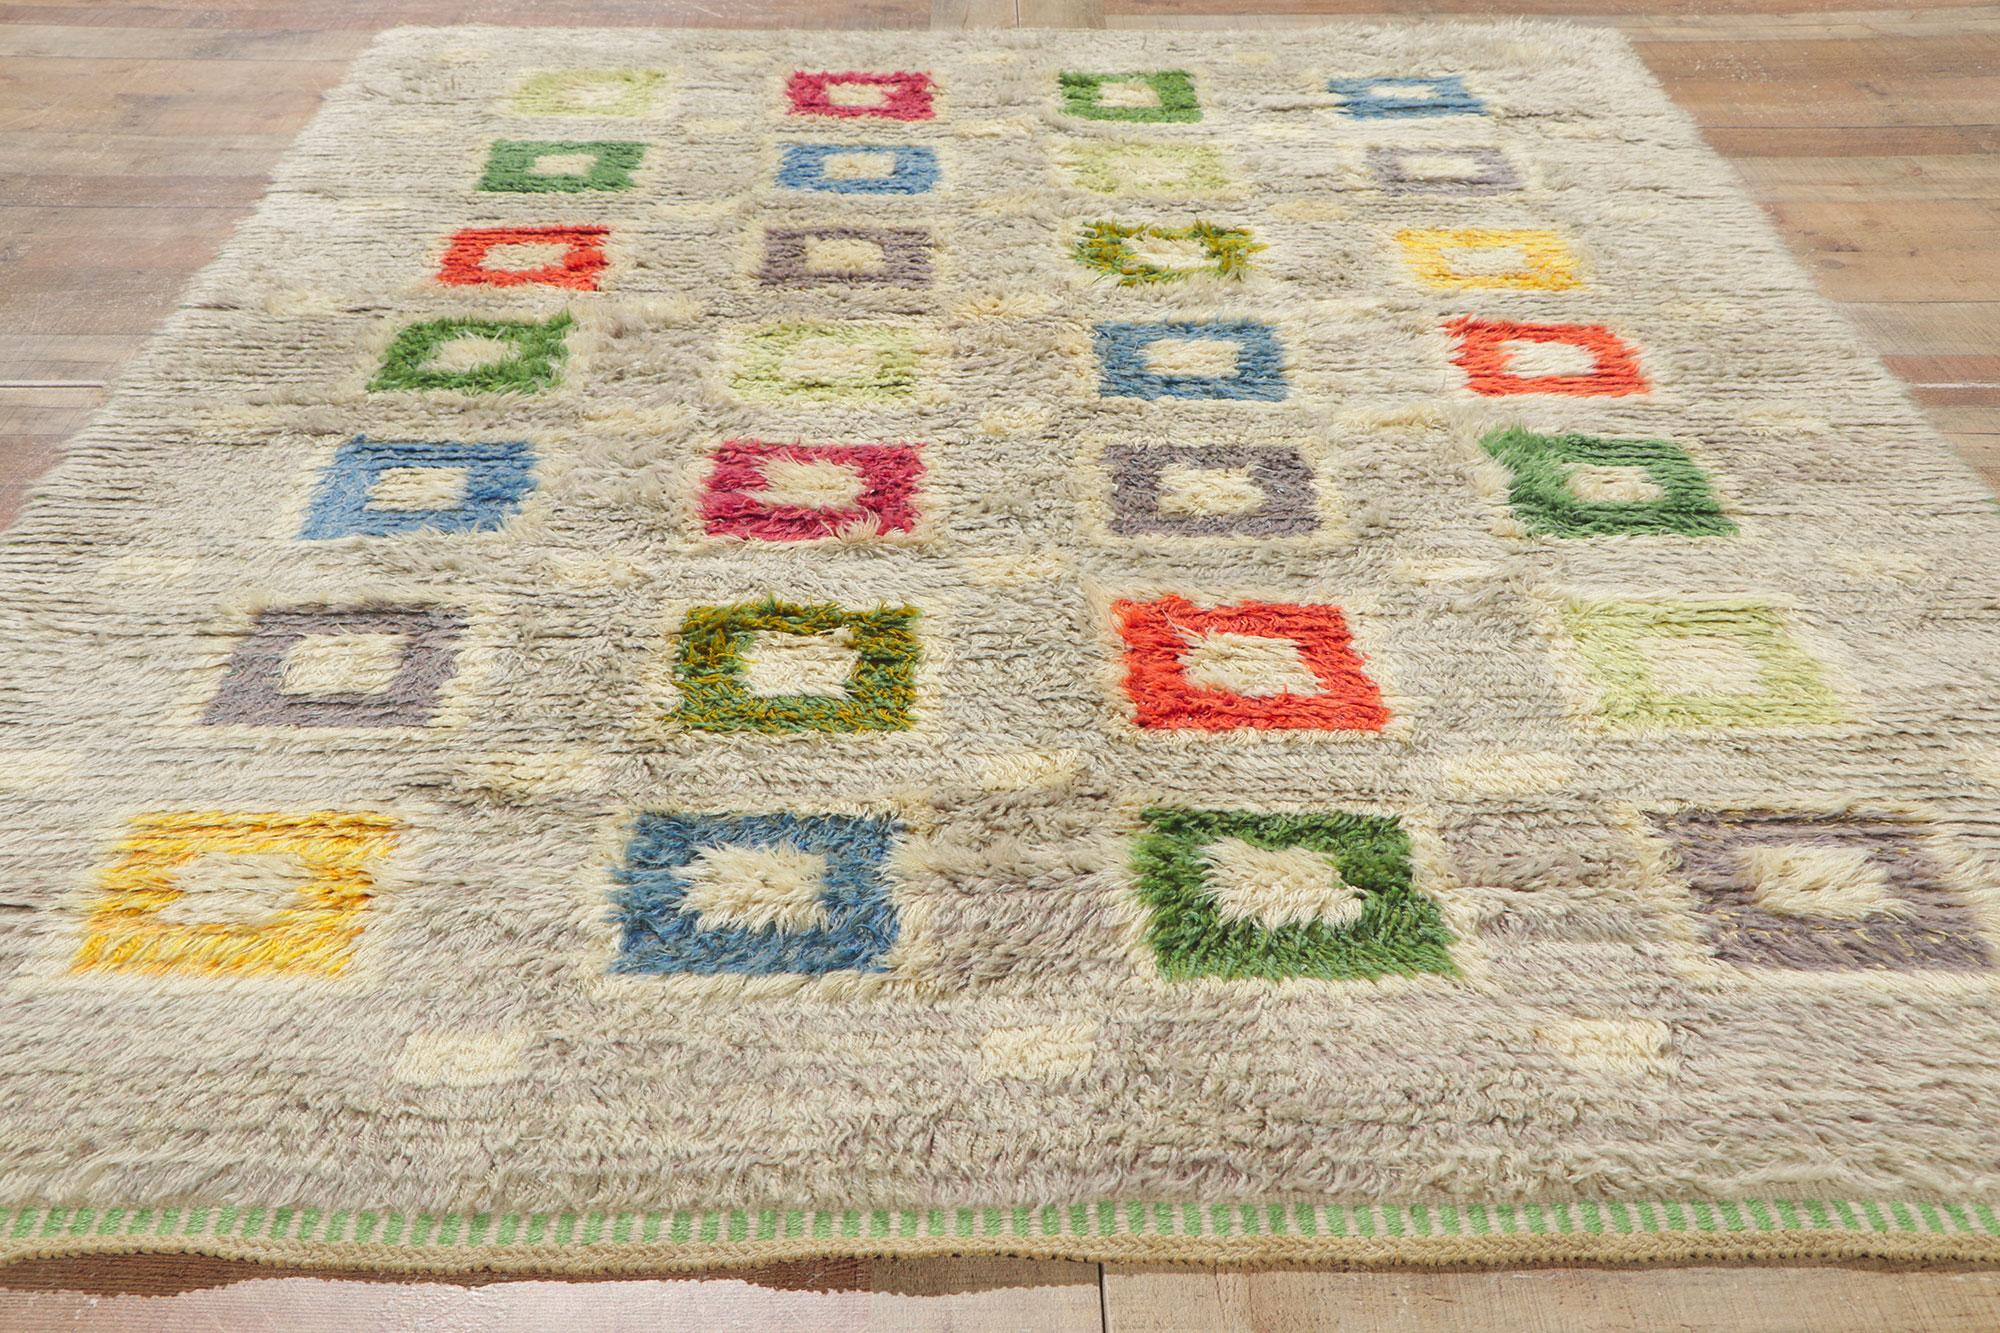 Scandinavian Modern Swedish Rya Rug, Färgglada Rutmönster-Colorful Squares In Good Condition For Sale In Dallas, TX